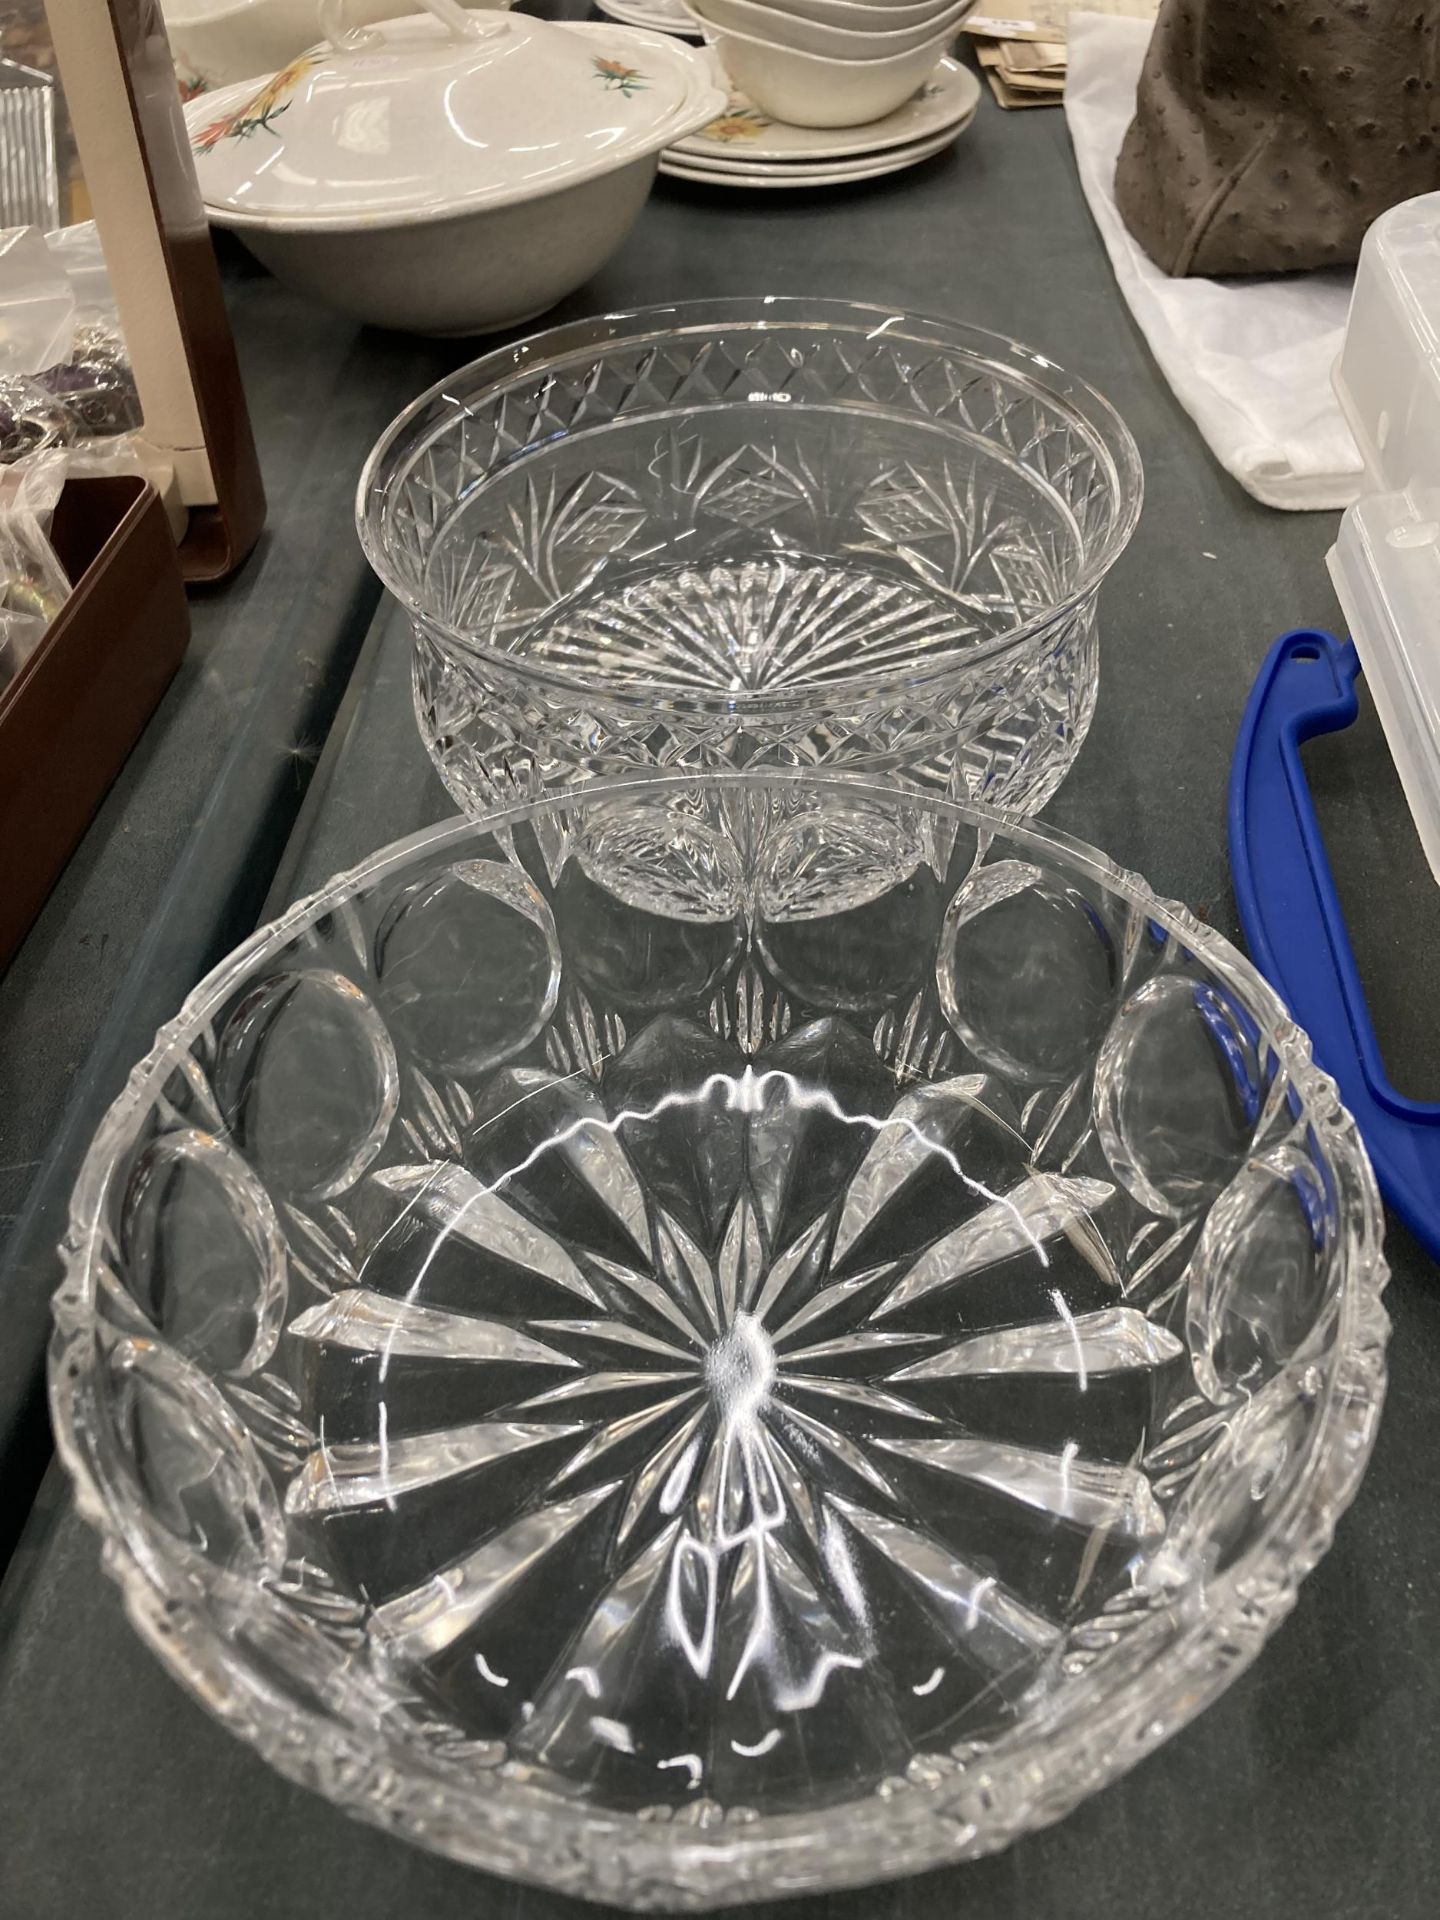 A QUANTITY OF GLASSWARE TO INCLUDE BOWLS, DESSERT DISHES, TEA LIGHT HOLDERS, ETC - Image 2 of 4